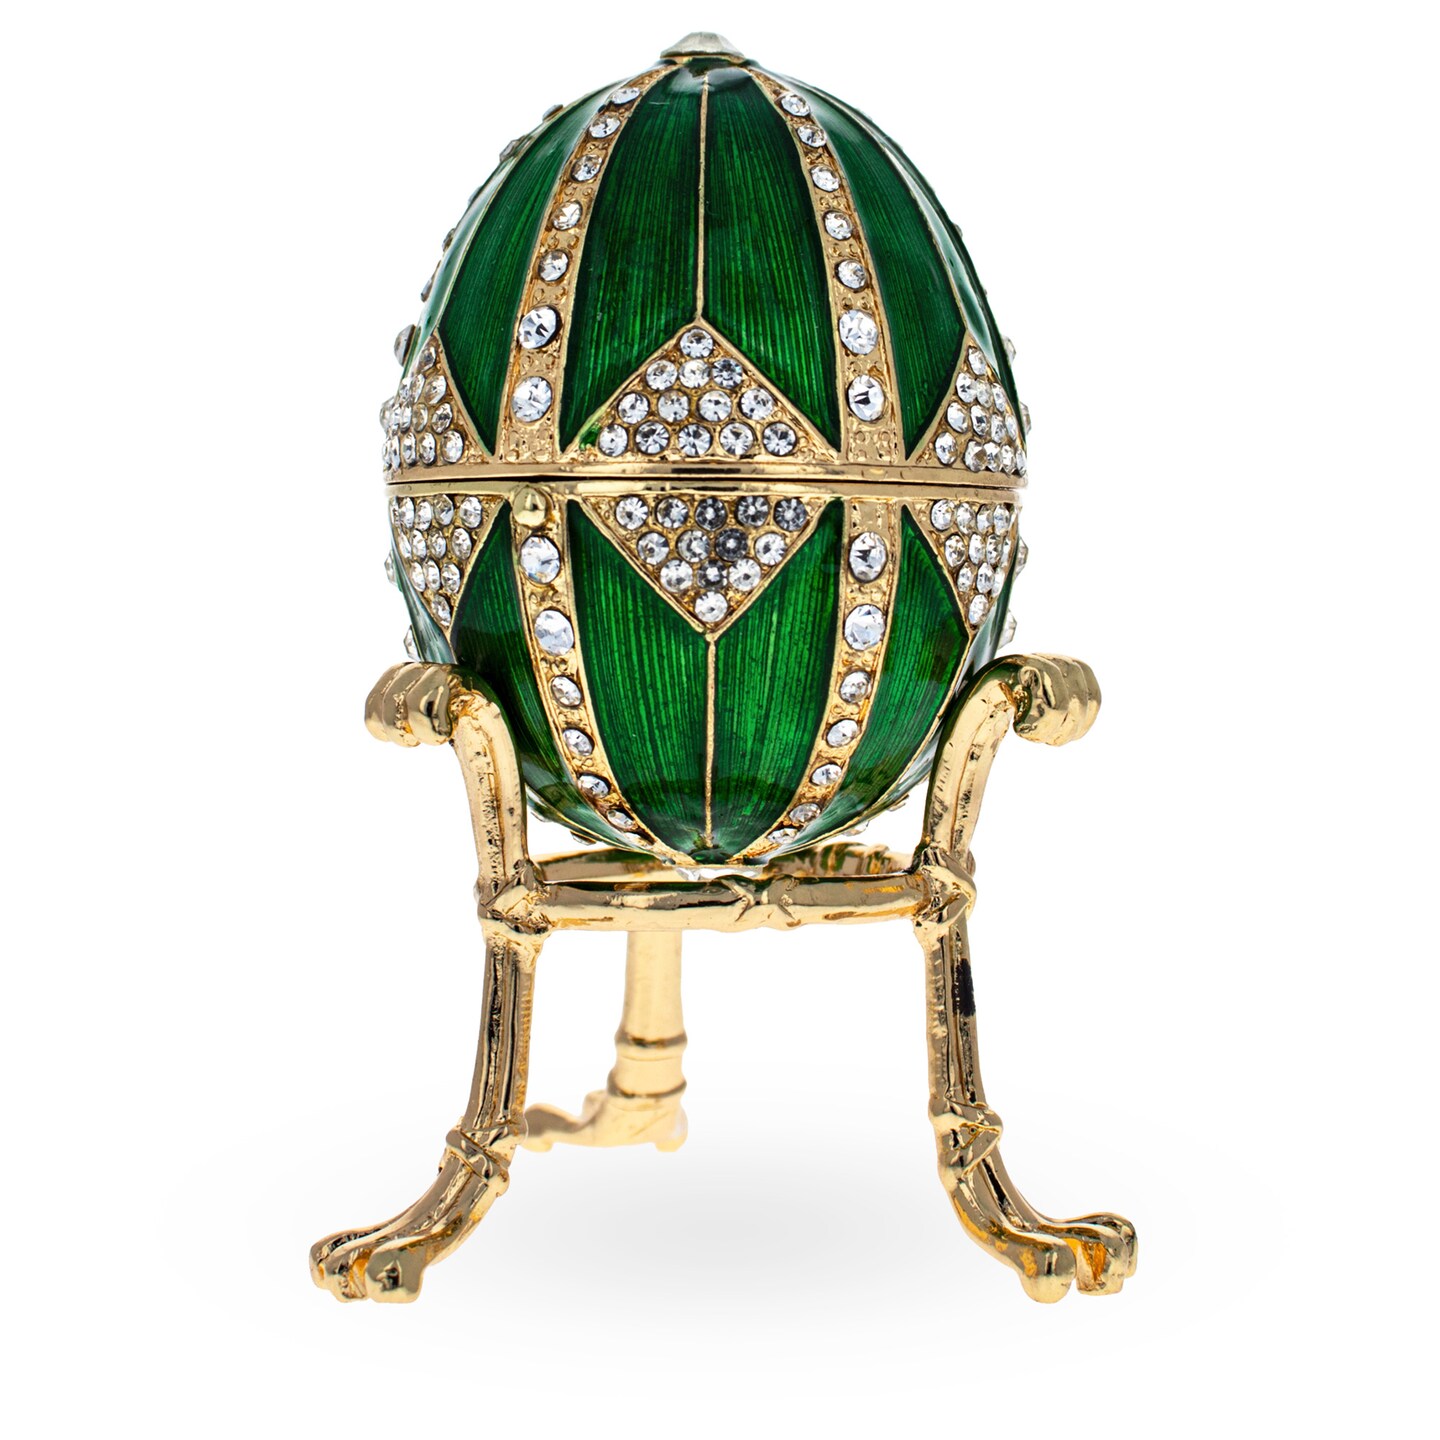 Crystal Rhombus on Green Enamel Royal Inspired Imperial Egg 3.15 Inches